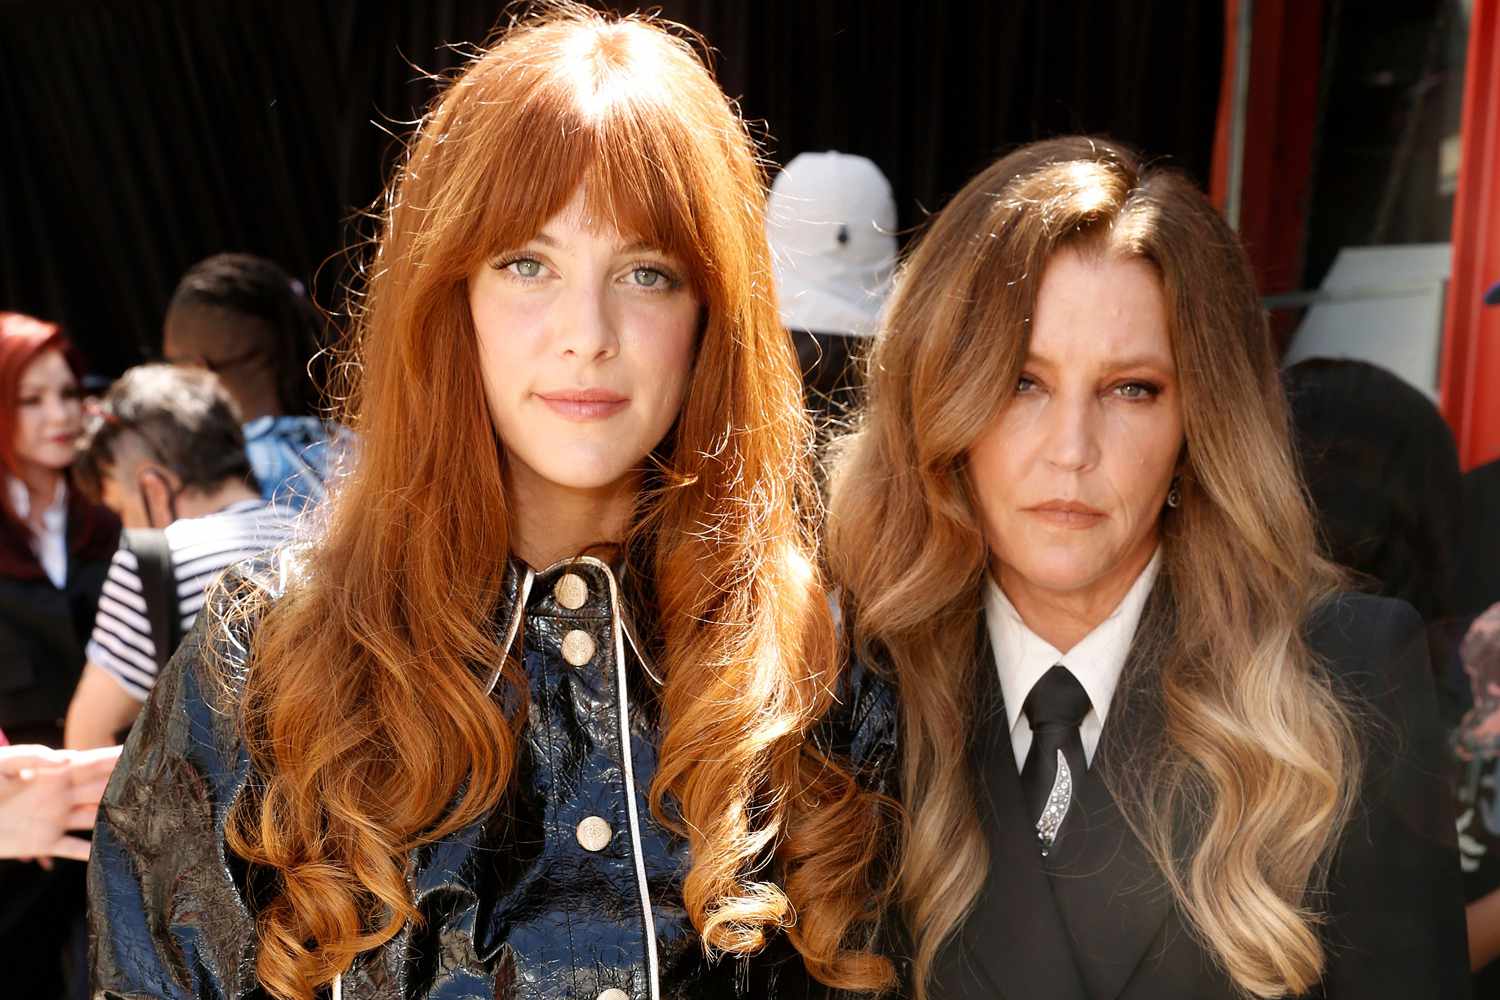 Lucky To Have Had The Best Riley Keough Reveals Heartfelt Message For Late Mother Lisa Marie